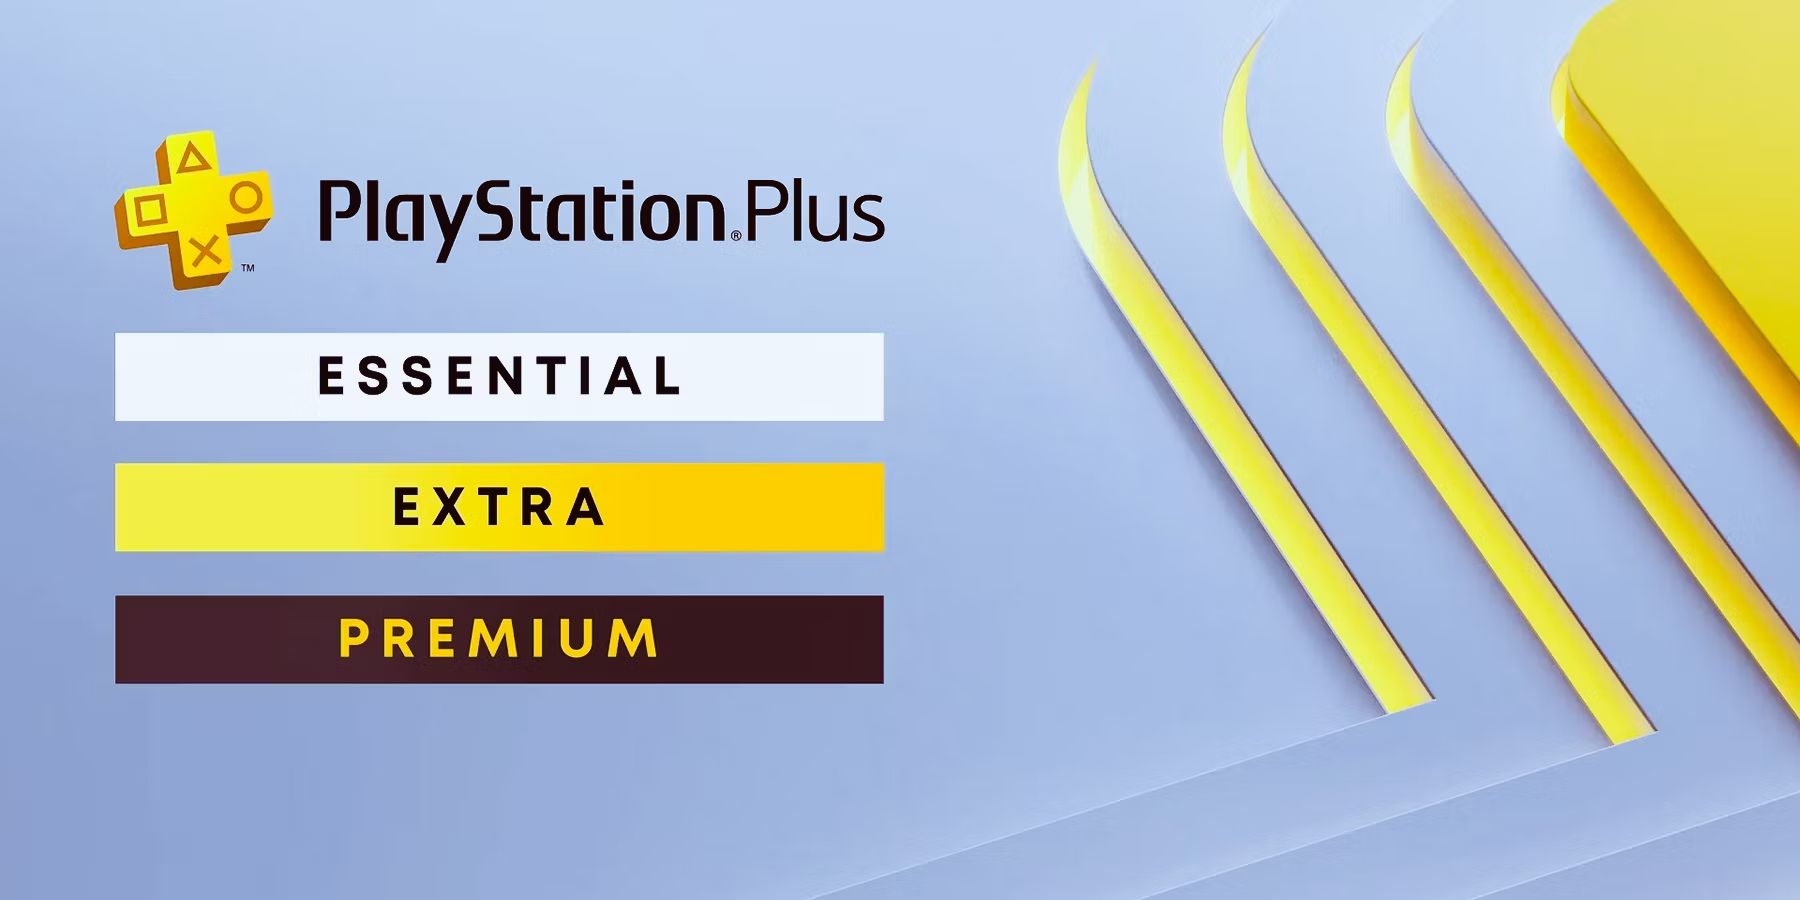 PS Plus Monthly Games for November 2023 Wish List